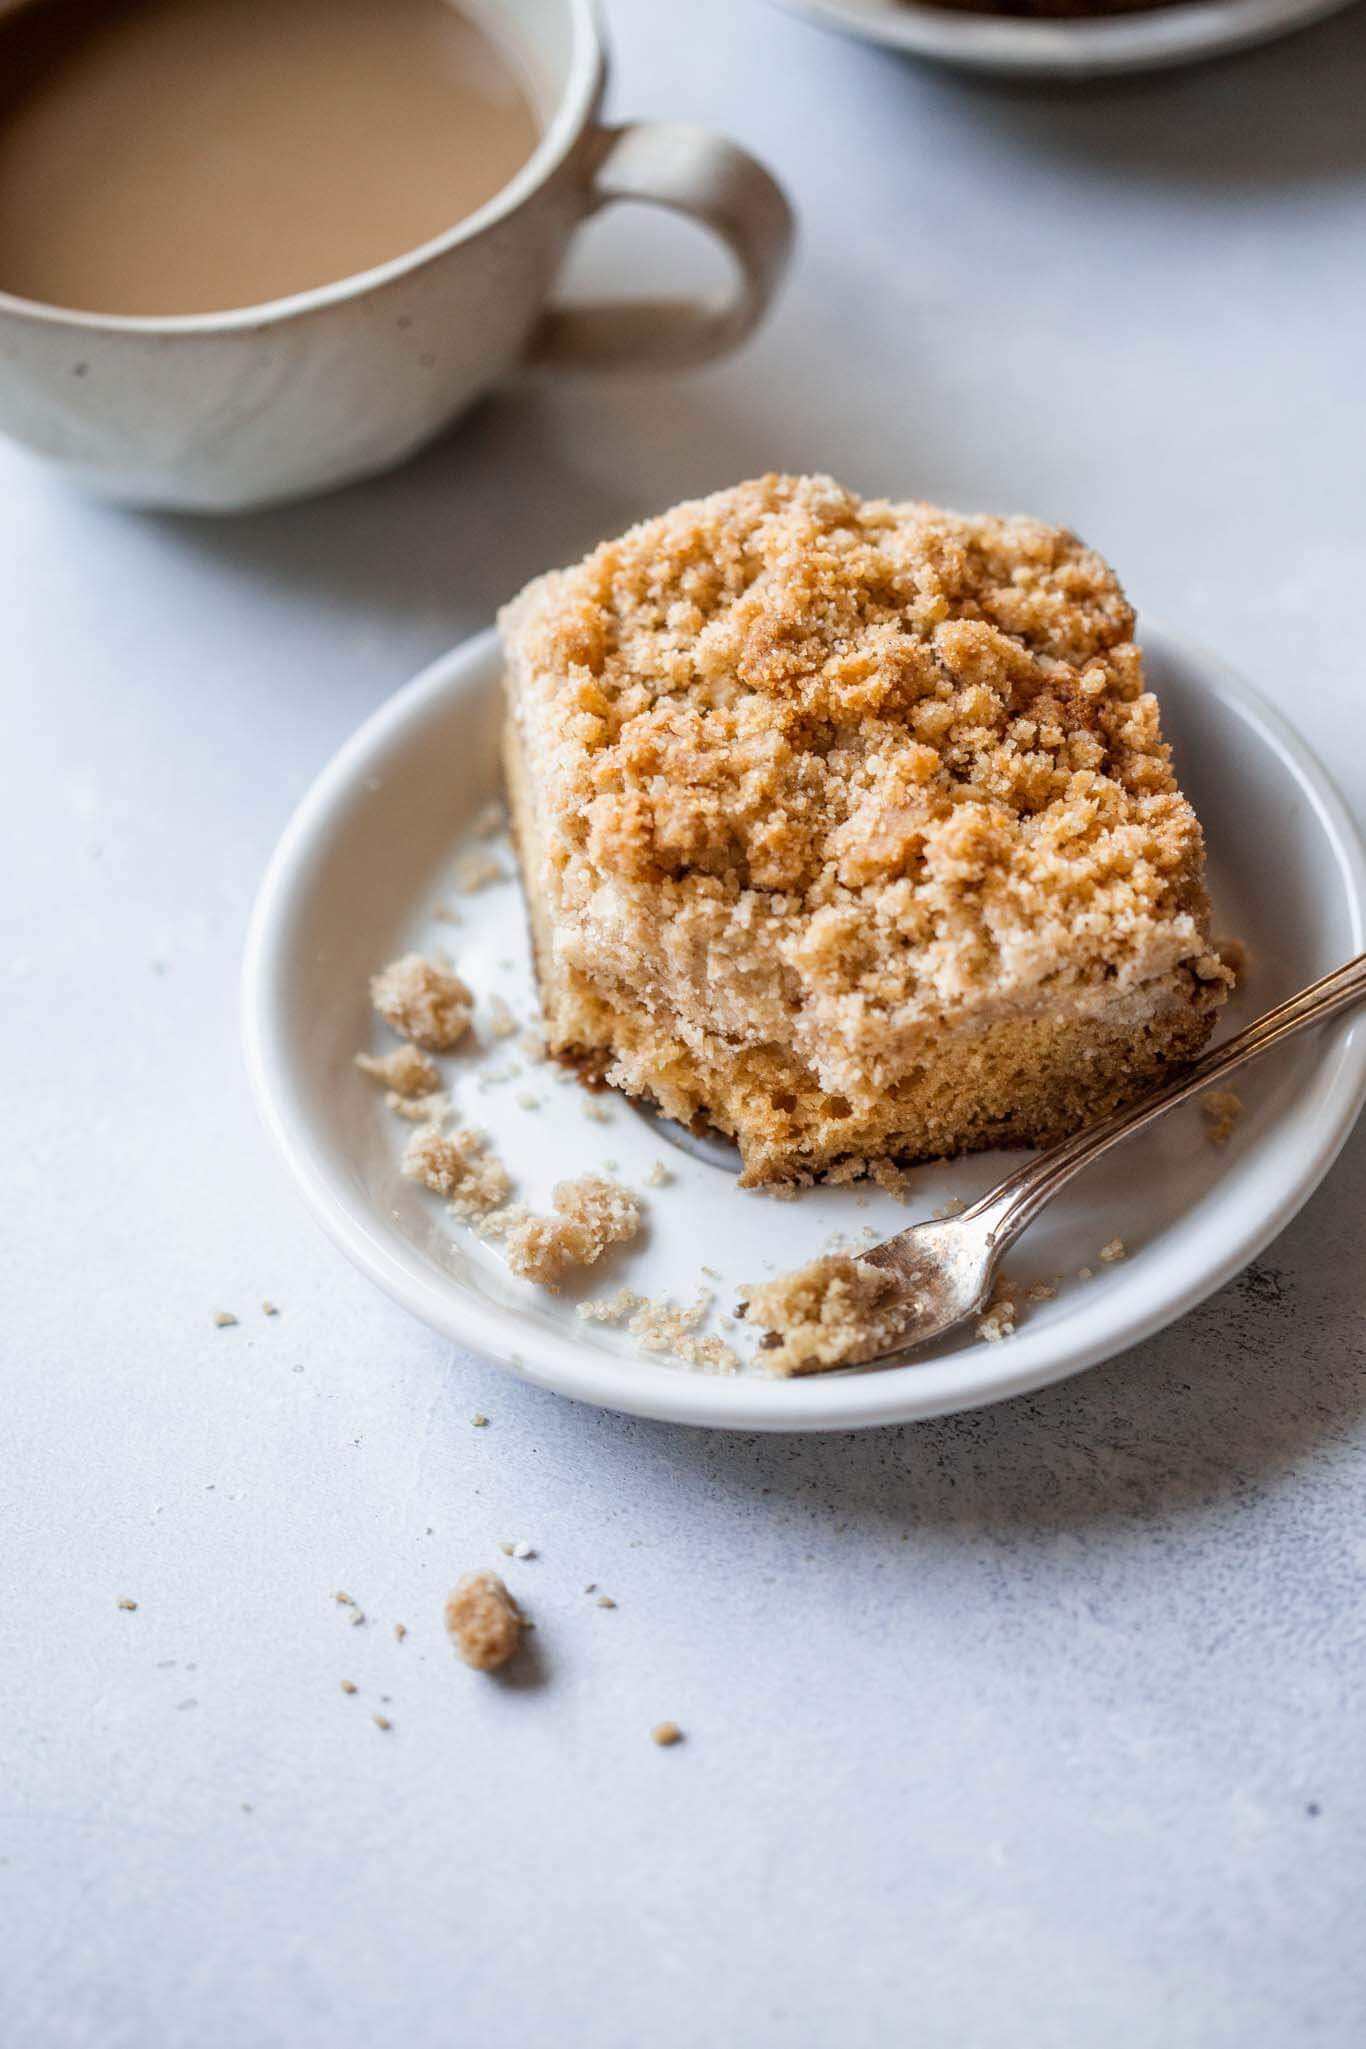 Side view of chai spiced crumb cake